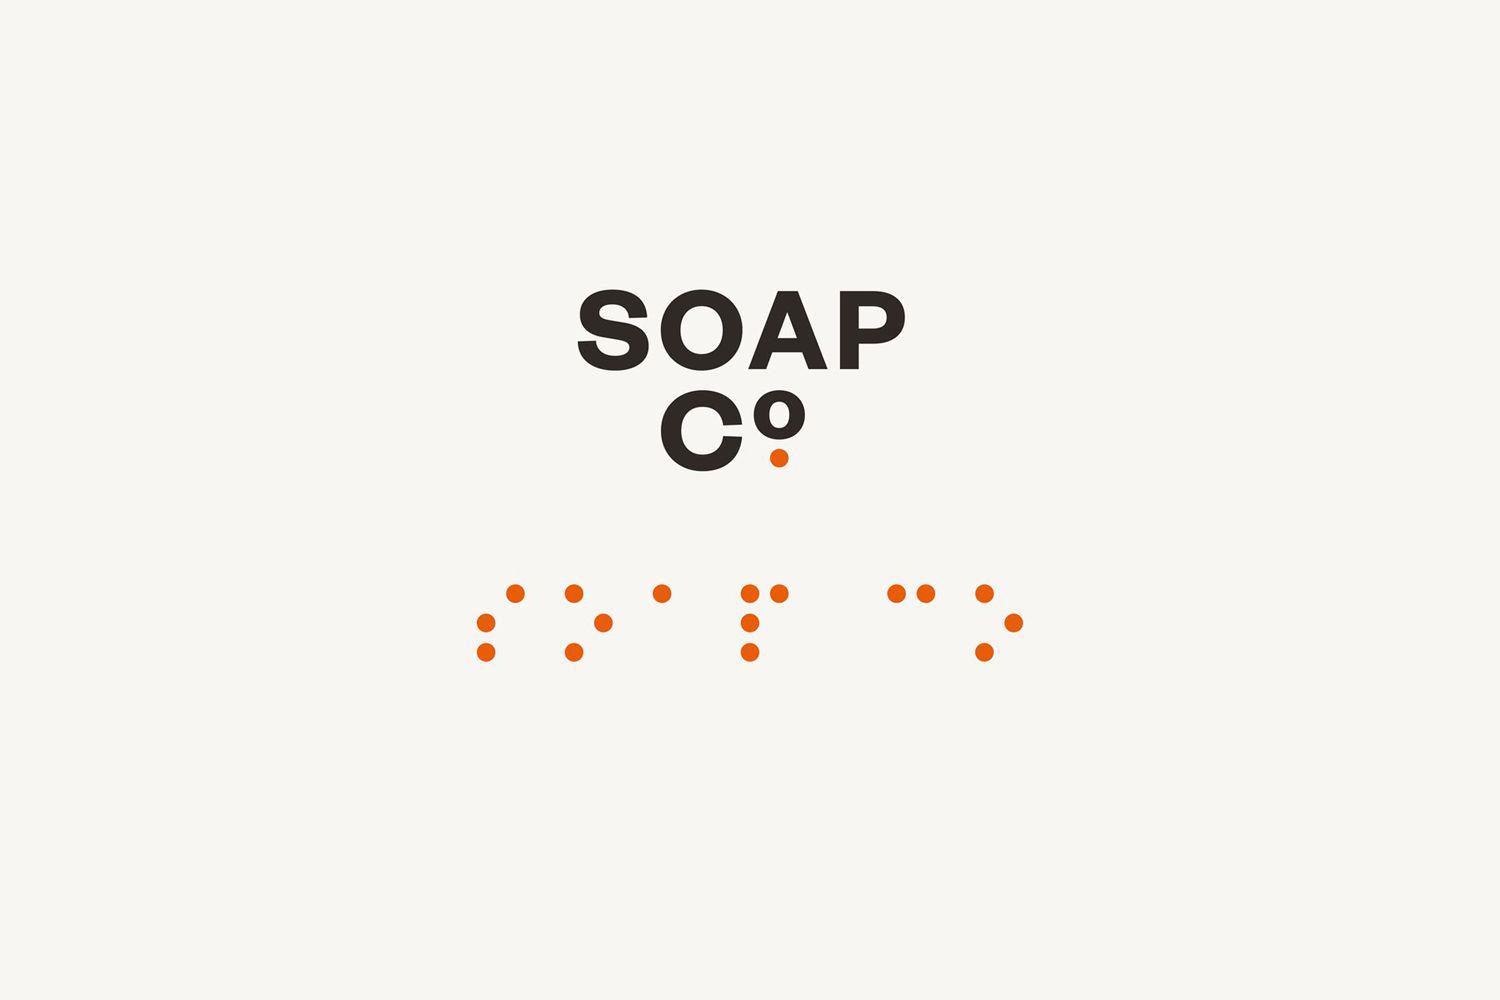 Soap.com Logo - New Brand Identity for Soap Co. by Paul Belford — BP&O